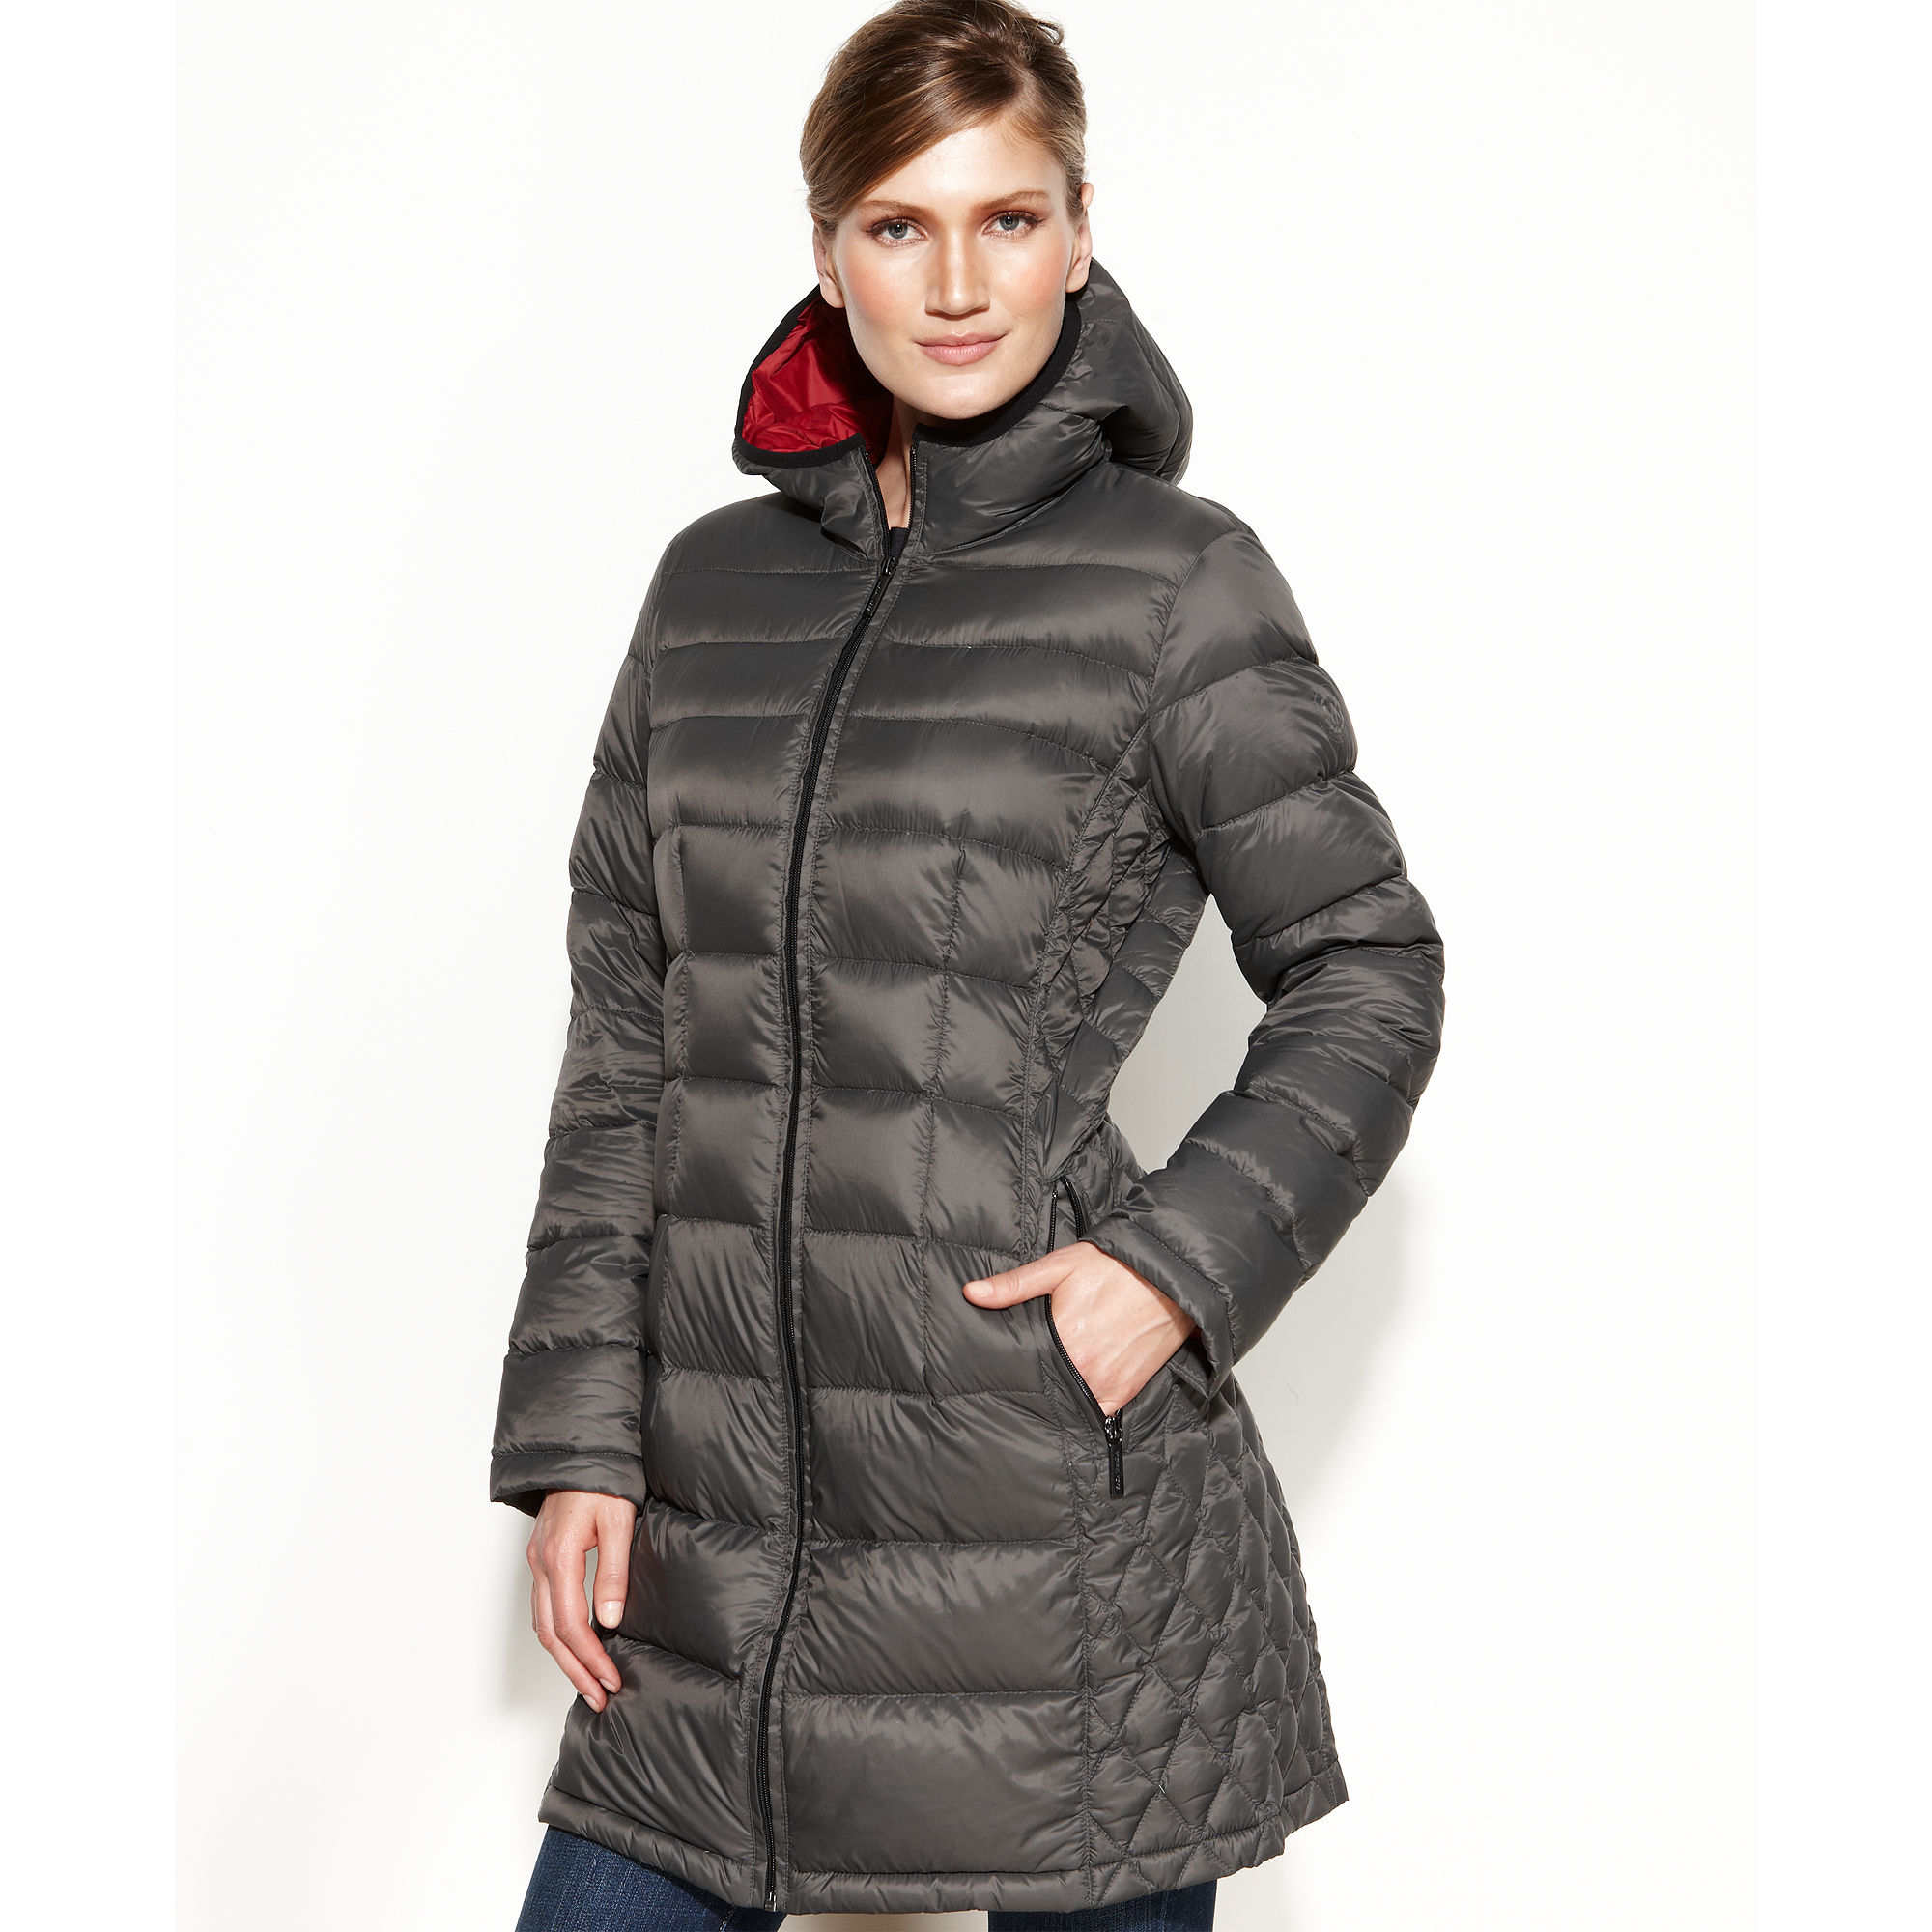 Lyst - Michael Kors Hooded Quilted Down Packable Puffer